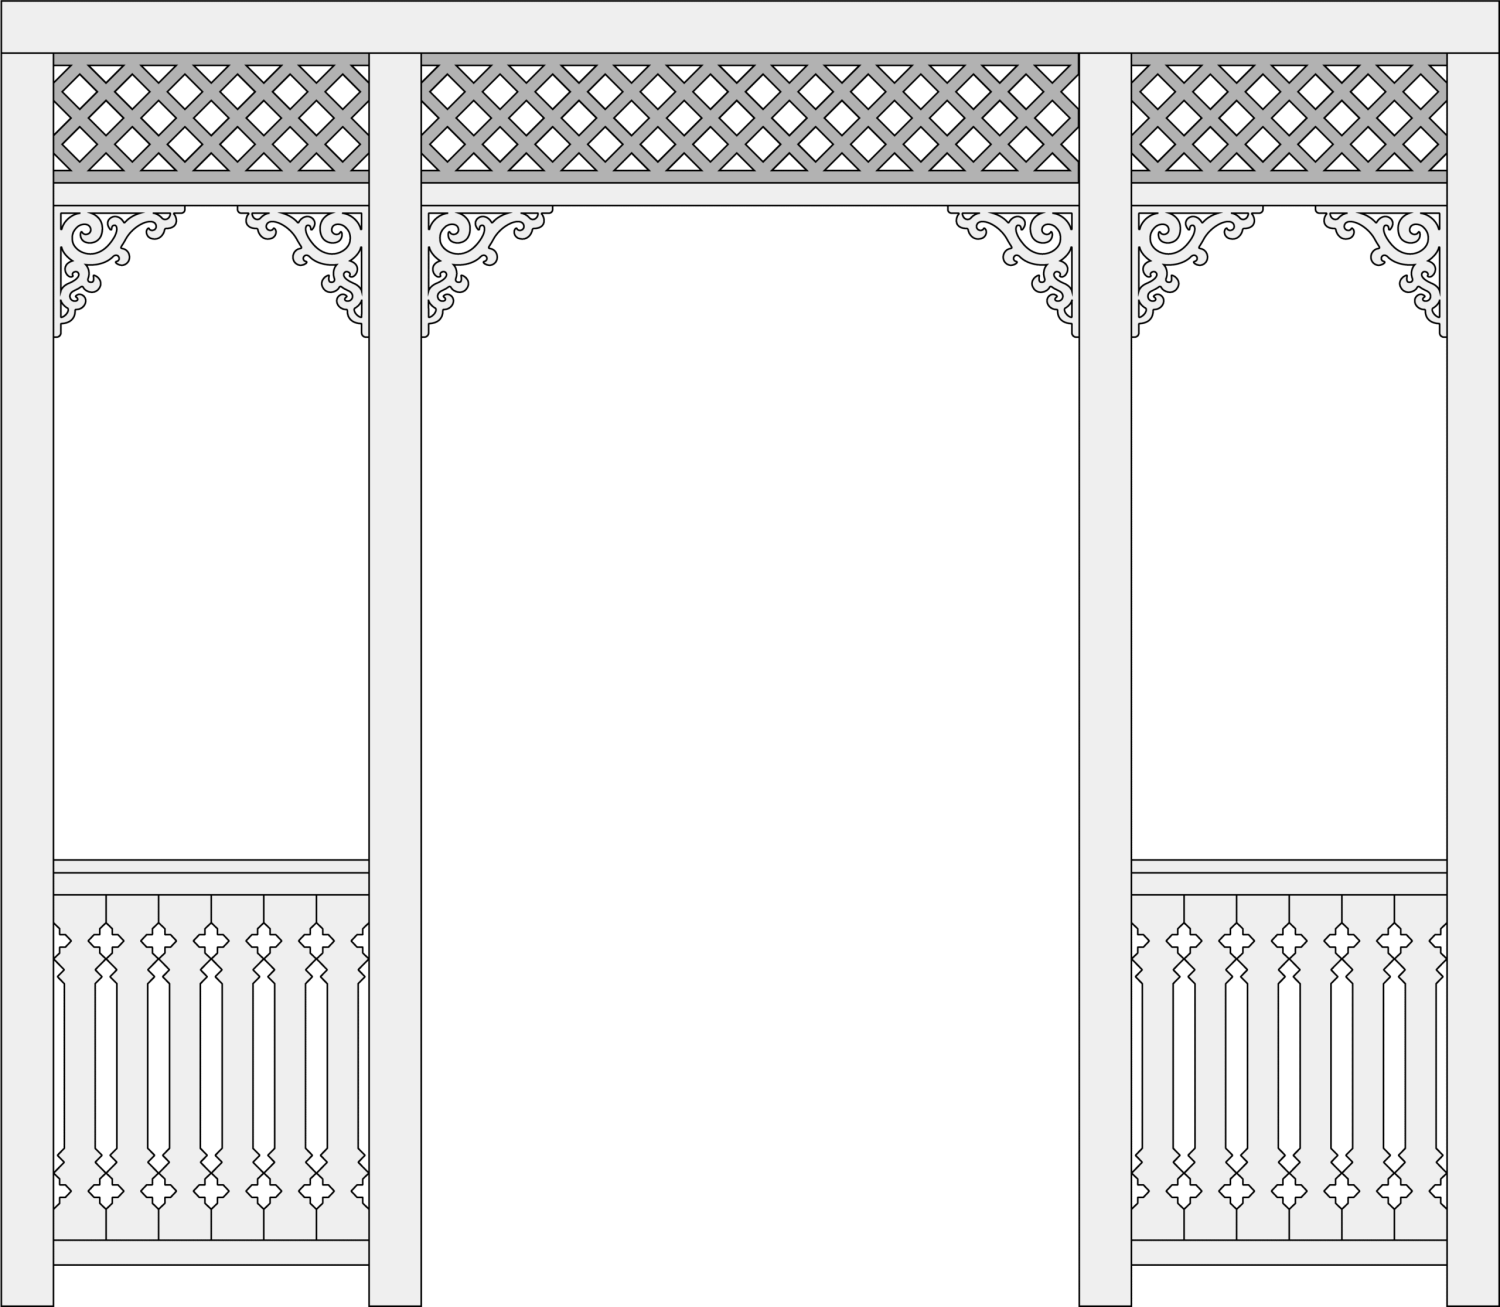 Veranda infill 003 - Illustrated with brackets and fence - Upper decoration for the porch